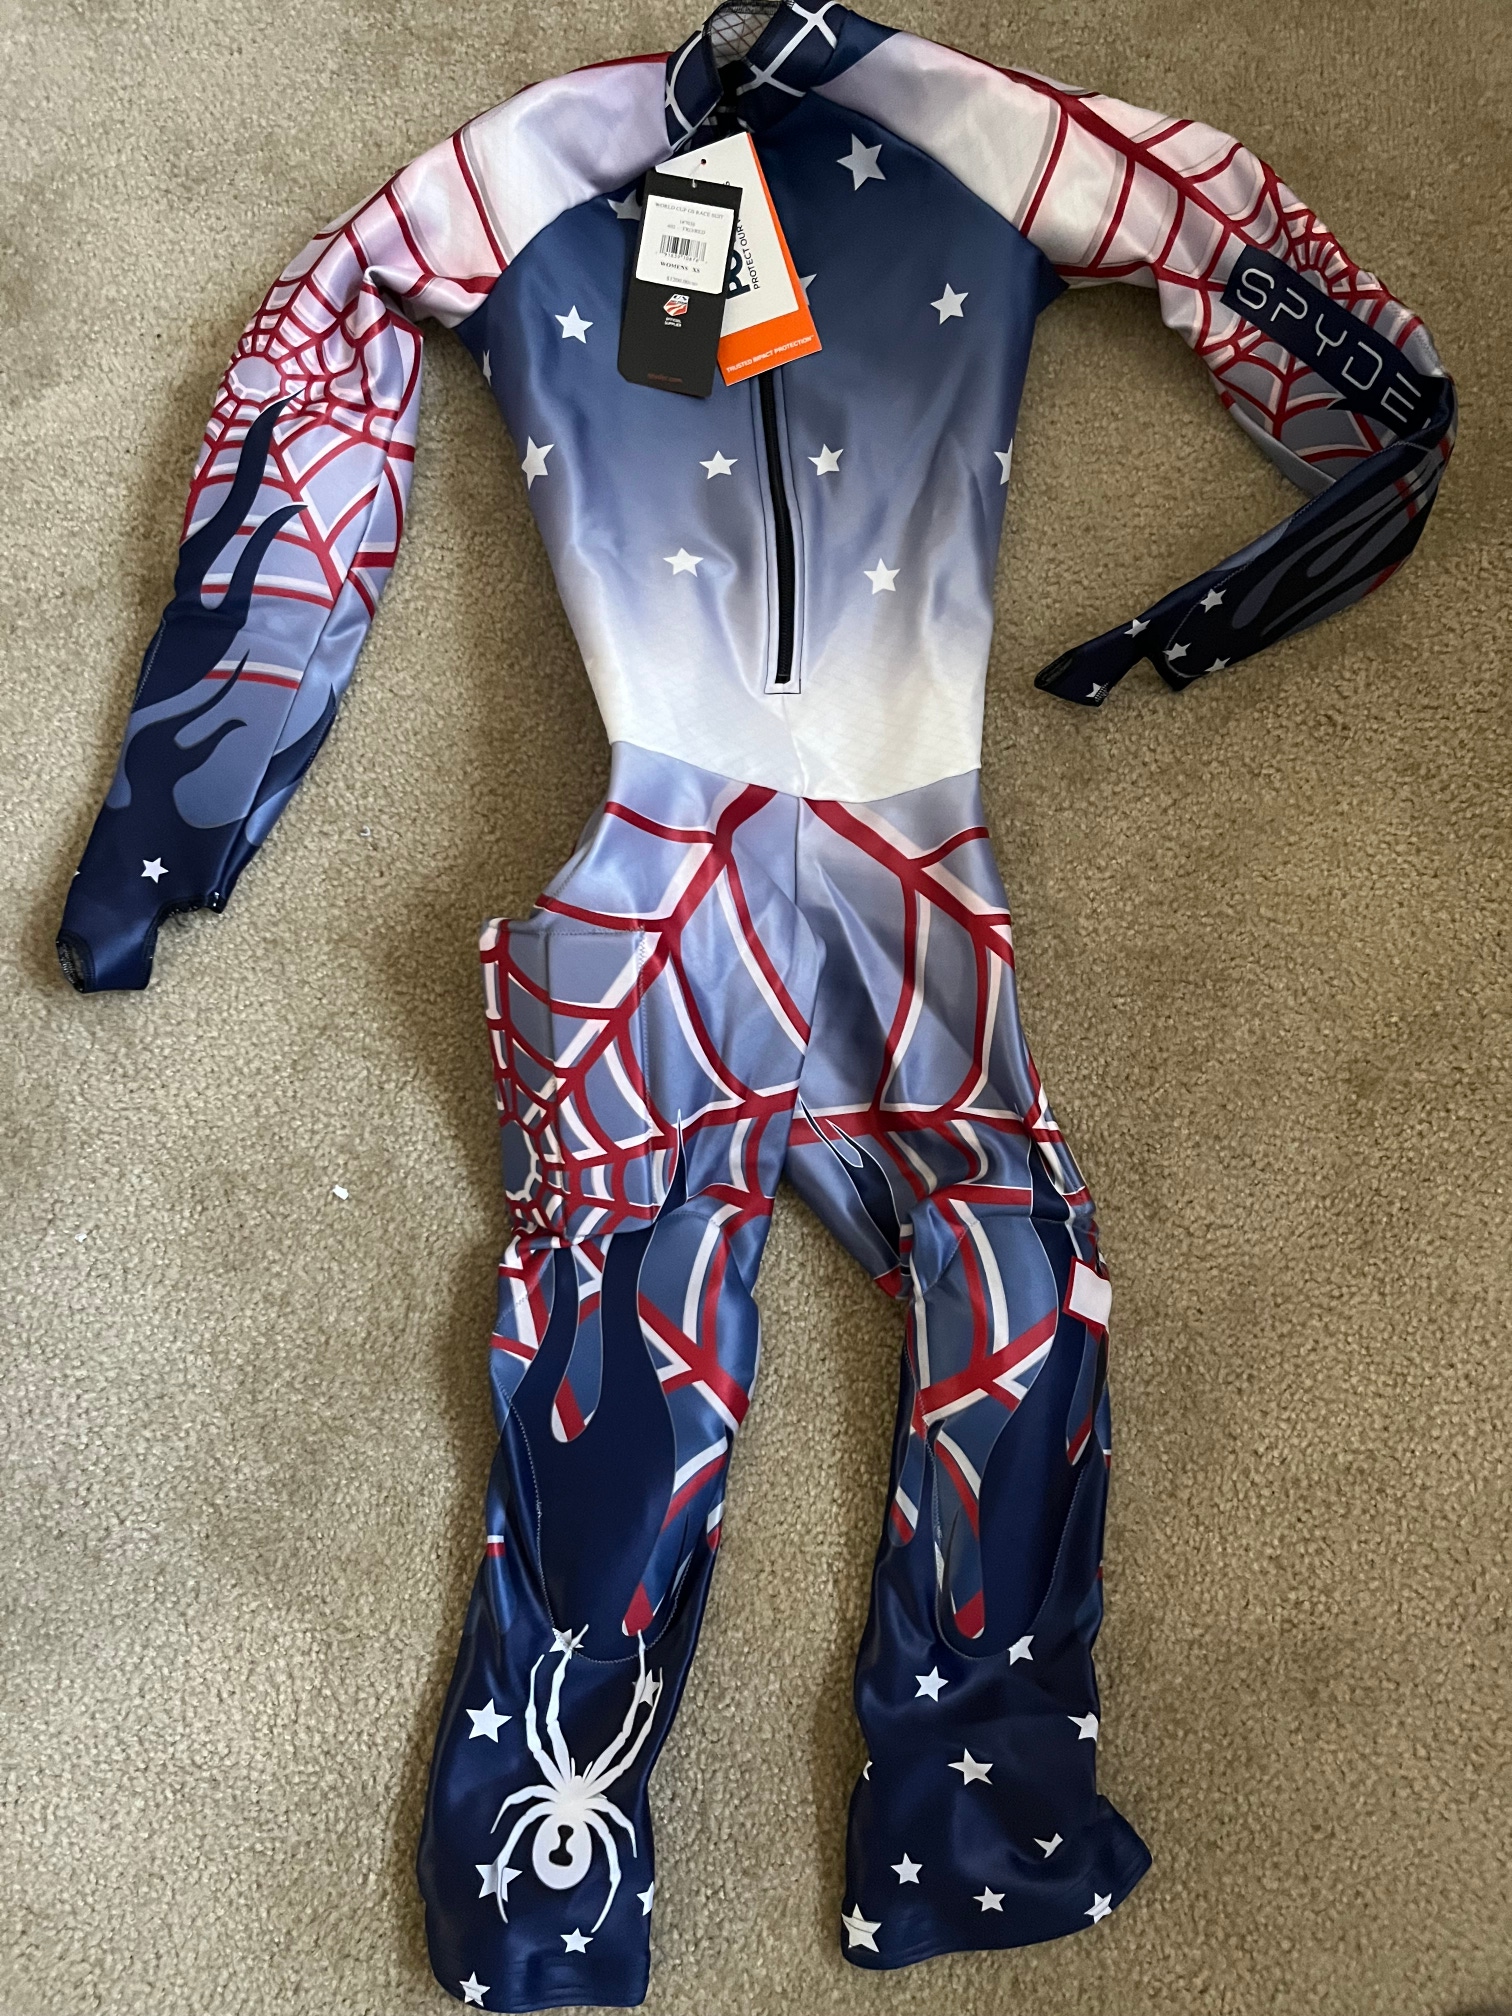 Spyder US Ski Team  World Cup GS Race Suit padded Extra Small